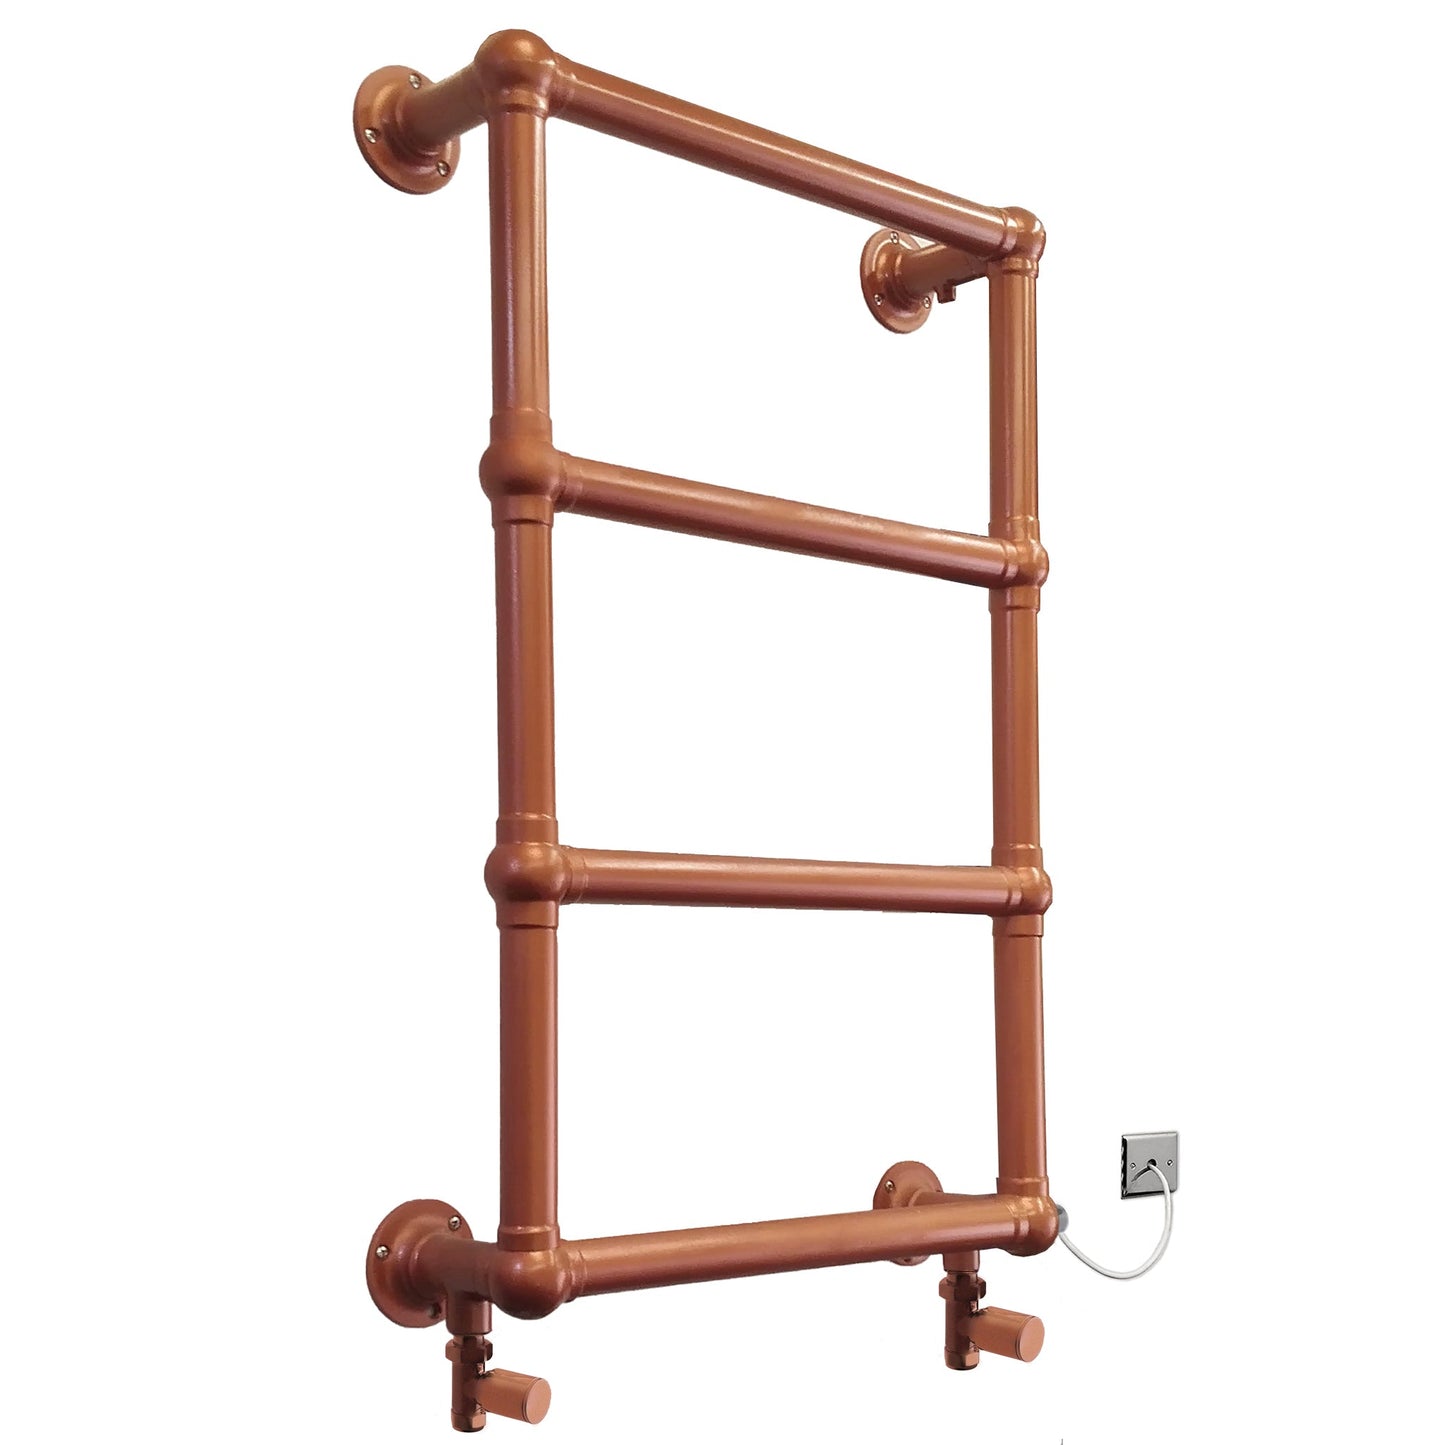 Dual Fuel 500 x 750mm Copper Look Designer Heated Towel Rail - (incl. Valves + Electric Heating Kit)